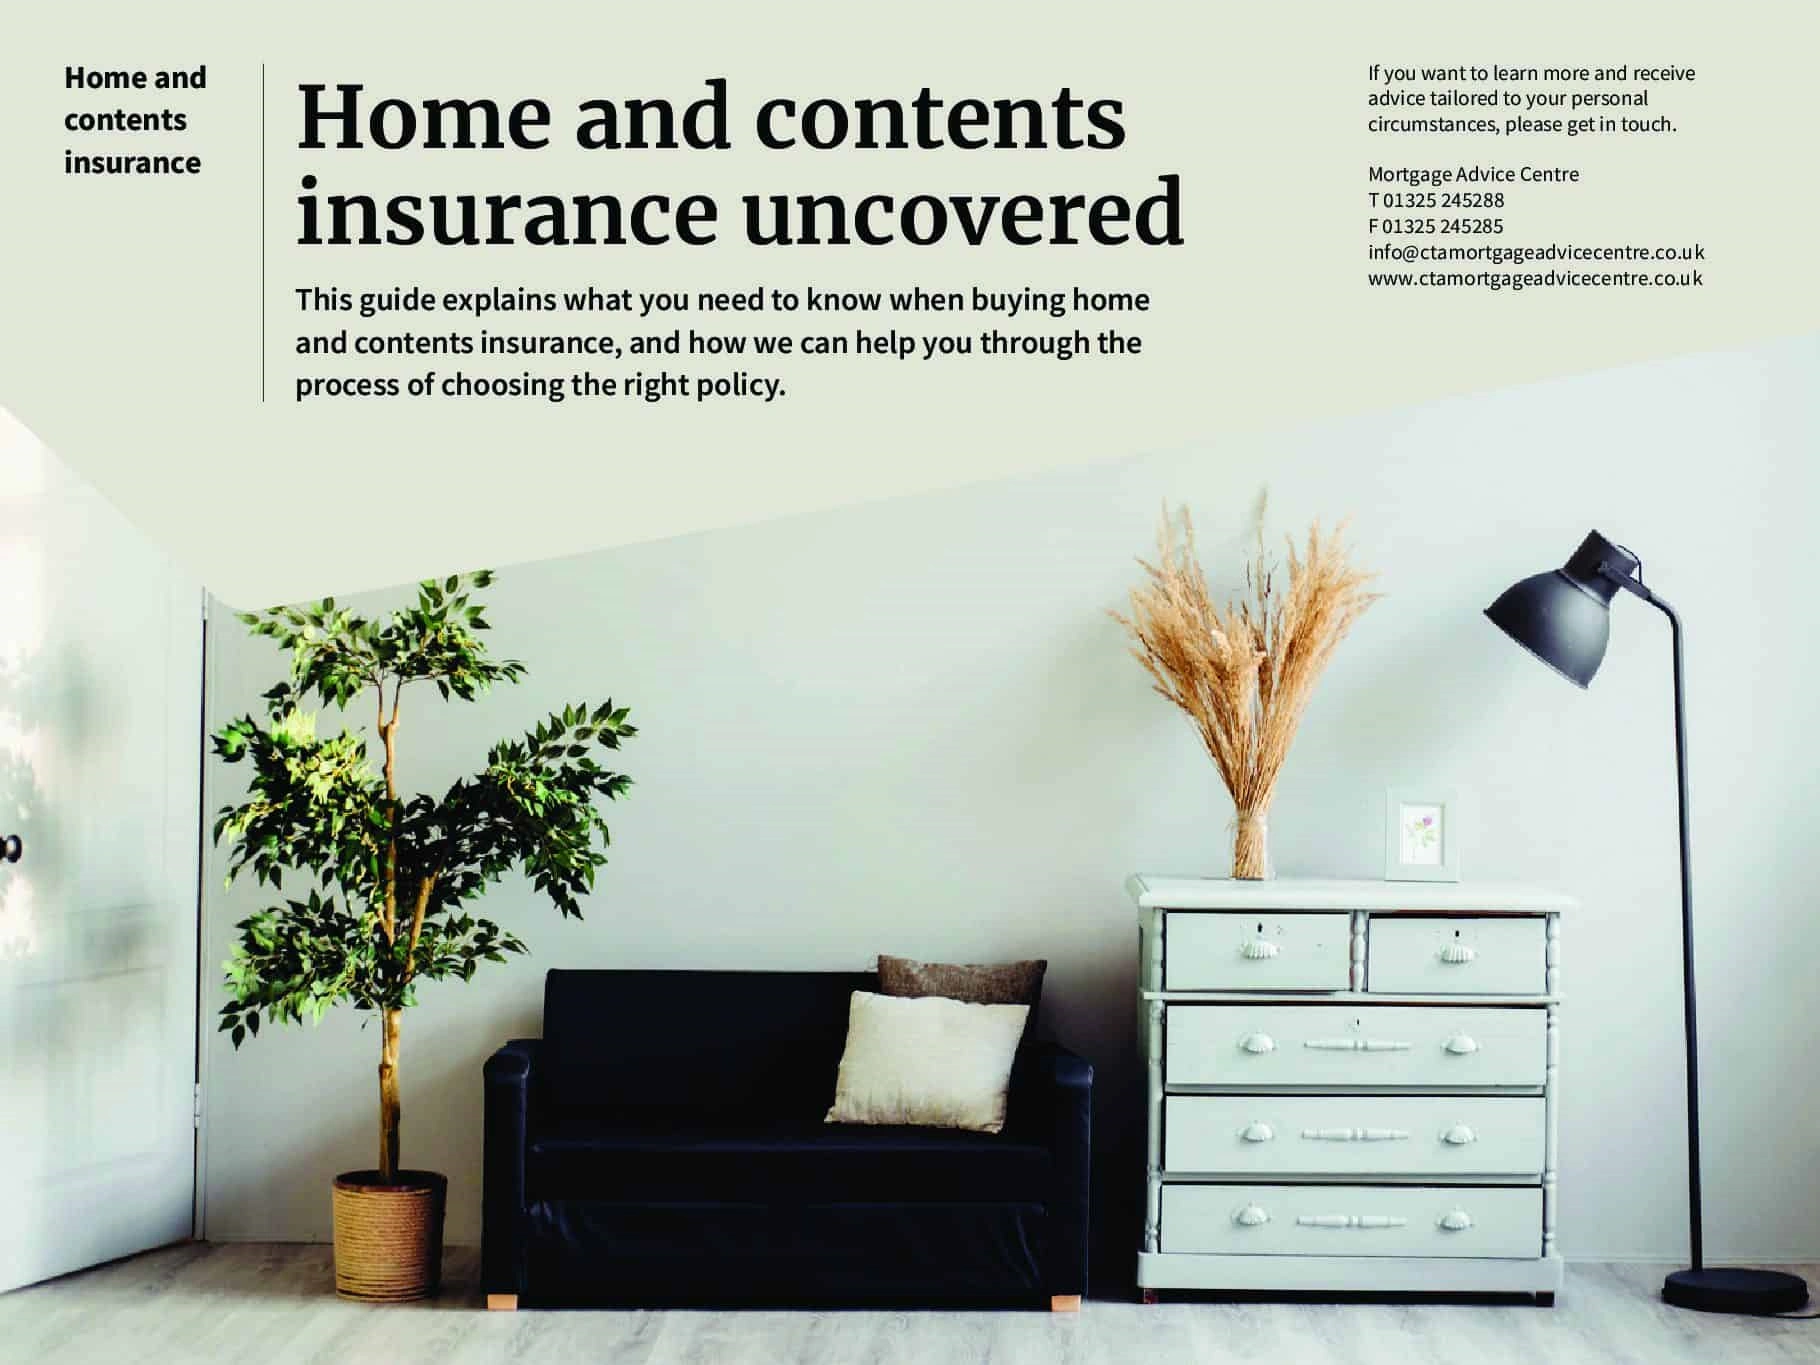 Home-and-Contents-Insurance-uncovered-guide